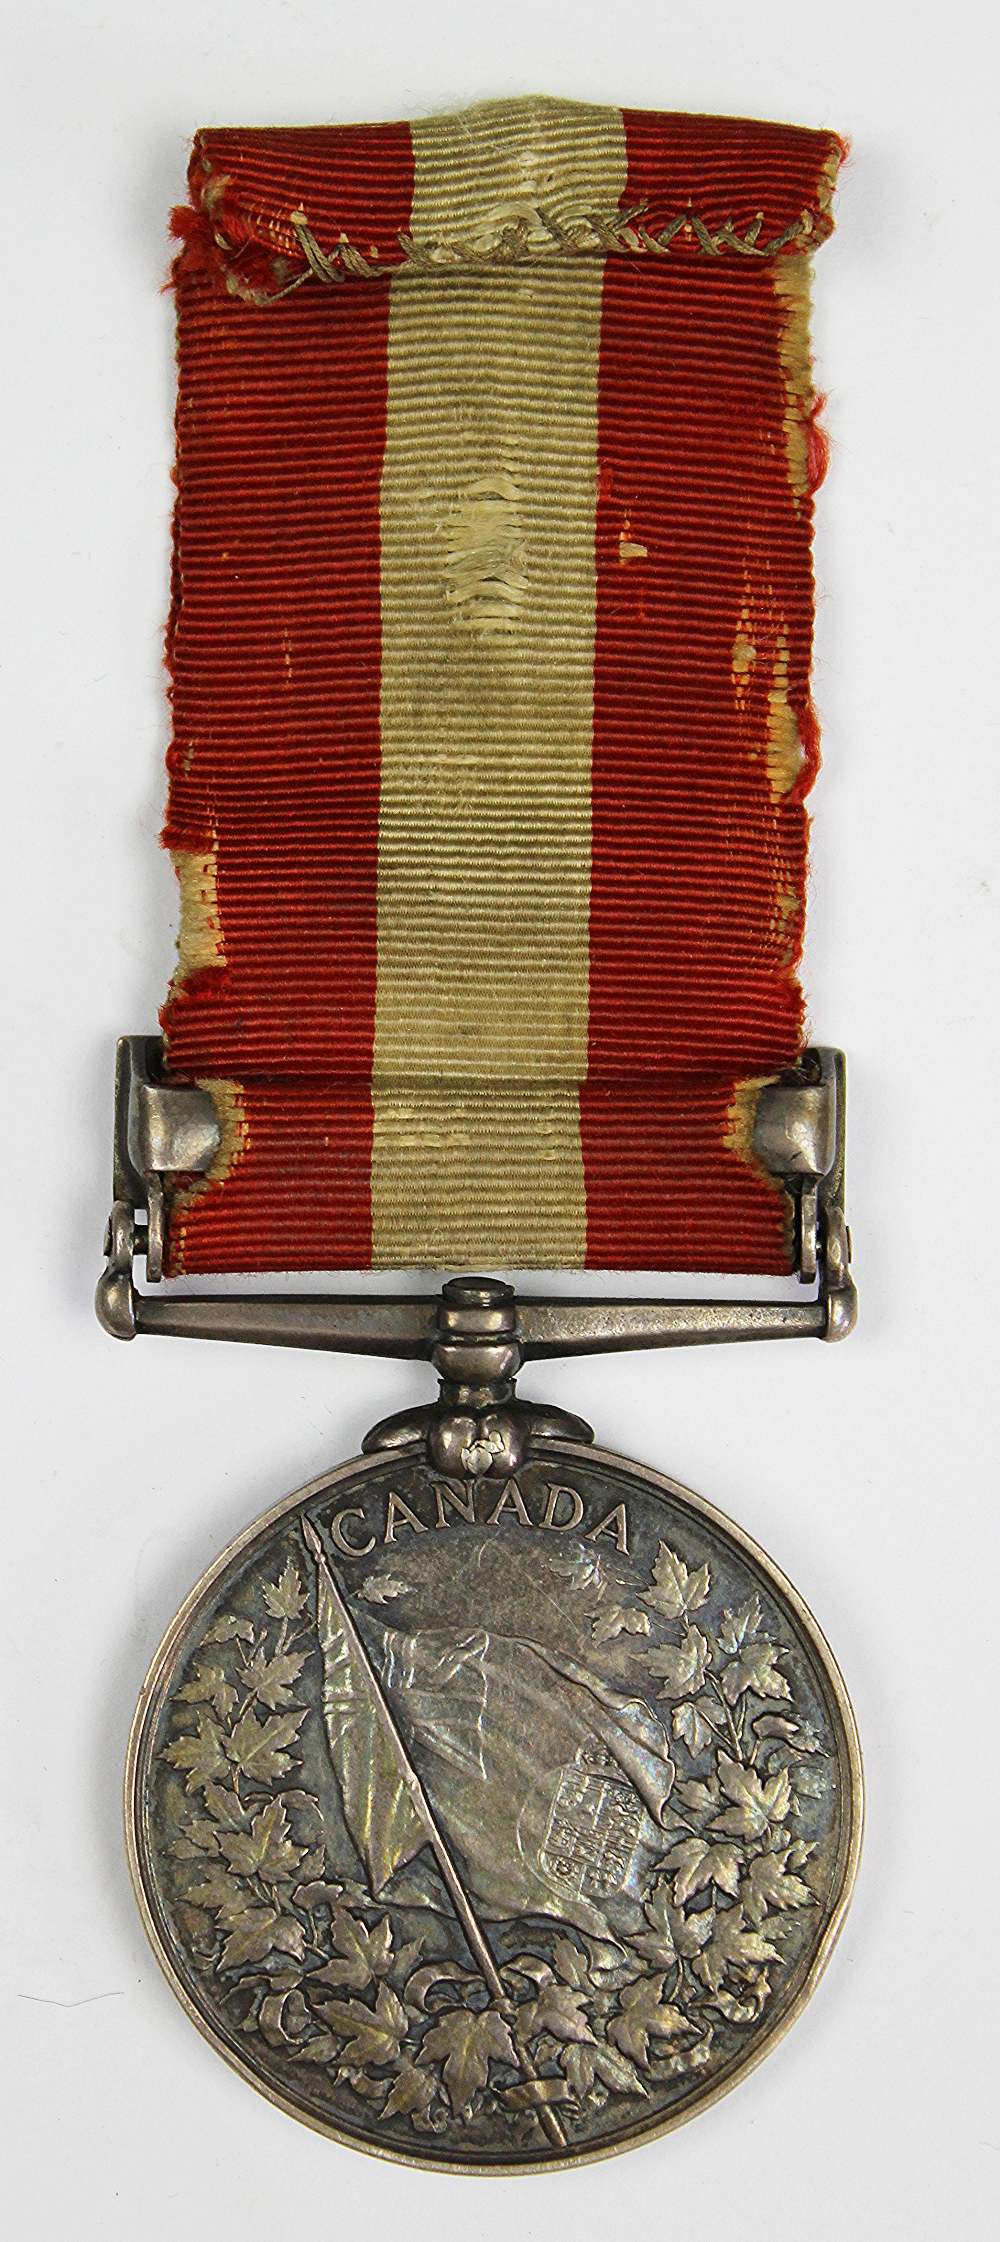 A Canada General Service Medal 1866-1870 to 1501 Gr J. Steele, R.A. - Image 2 of 4